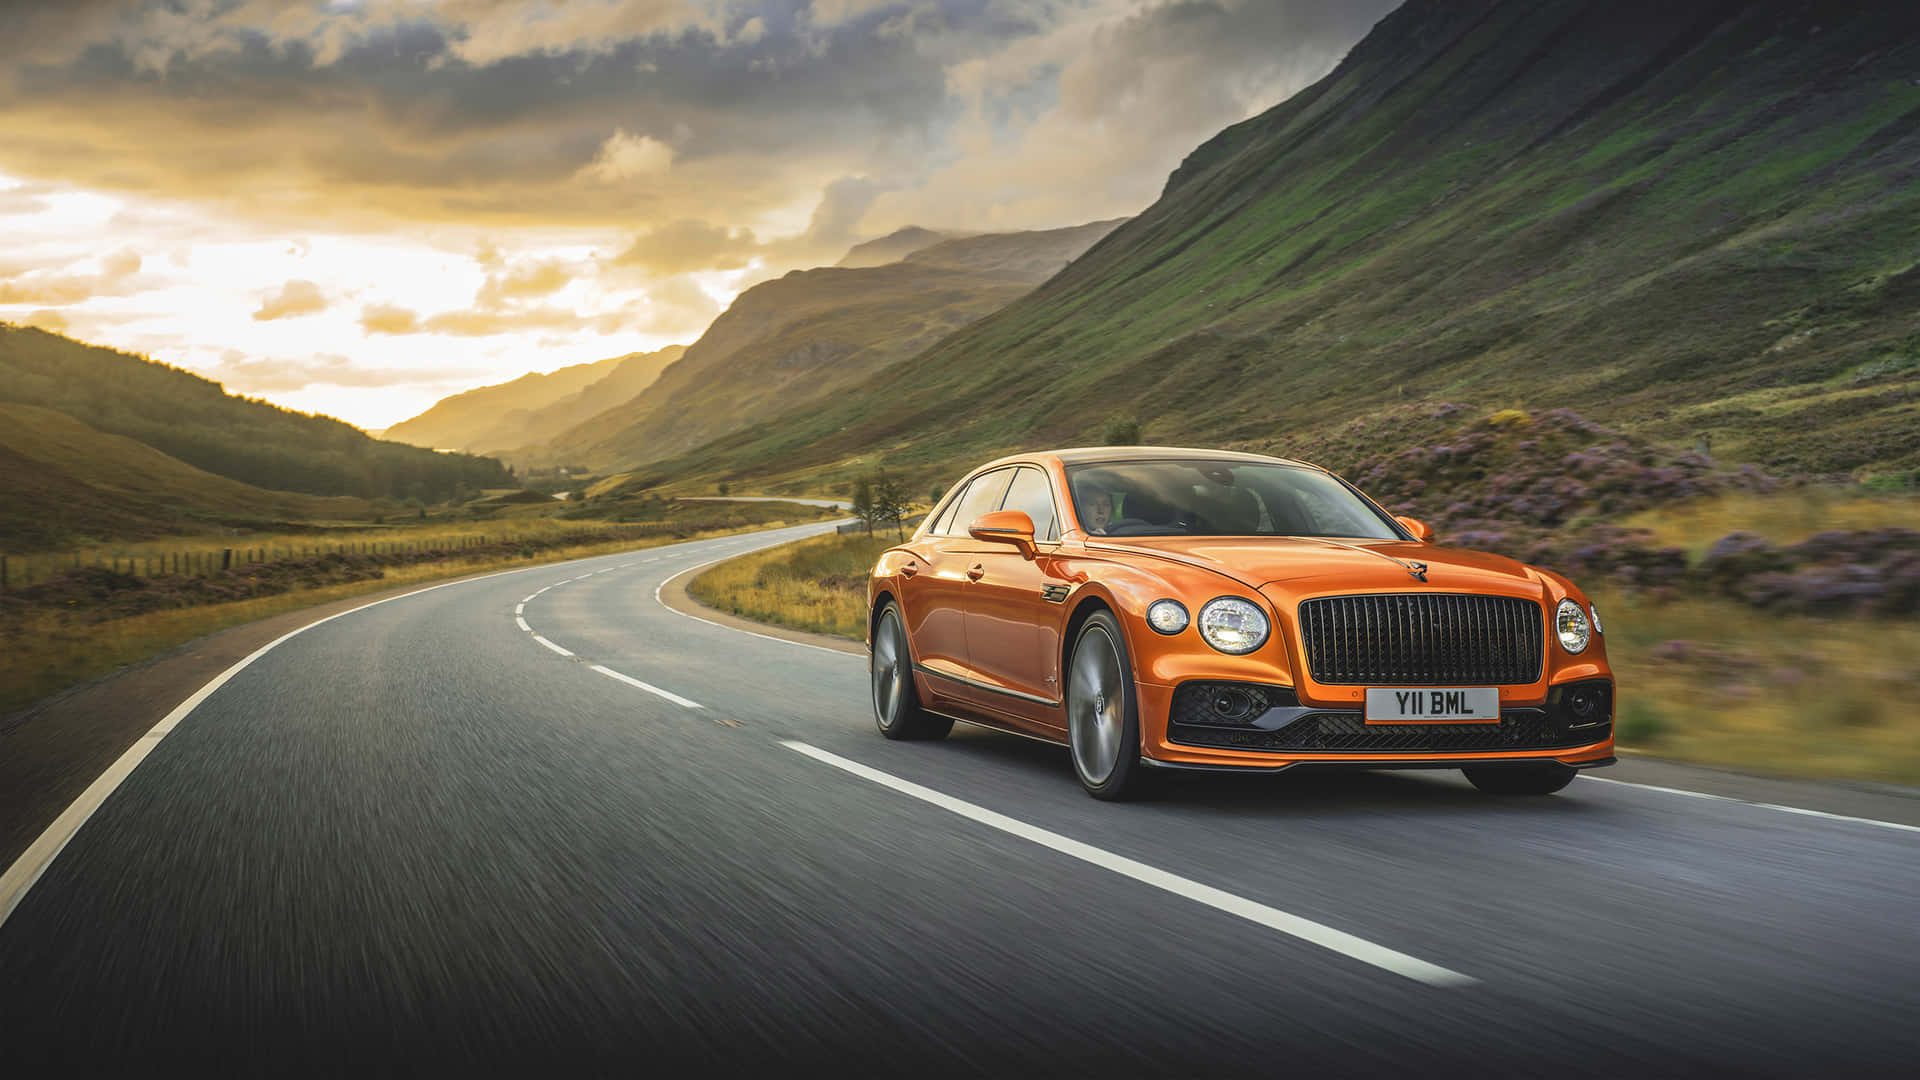 The Luxurious Bentley Mulsanne in Action Wallpaper